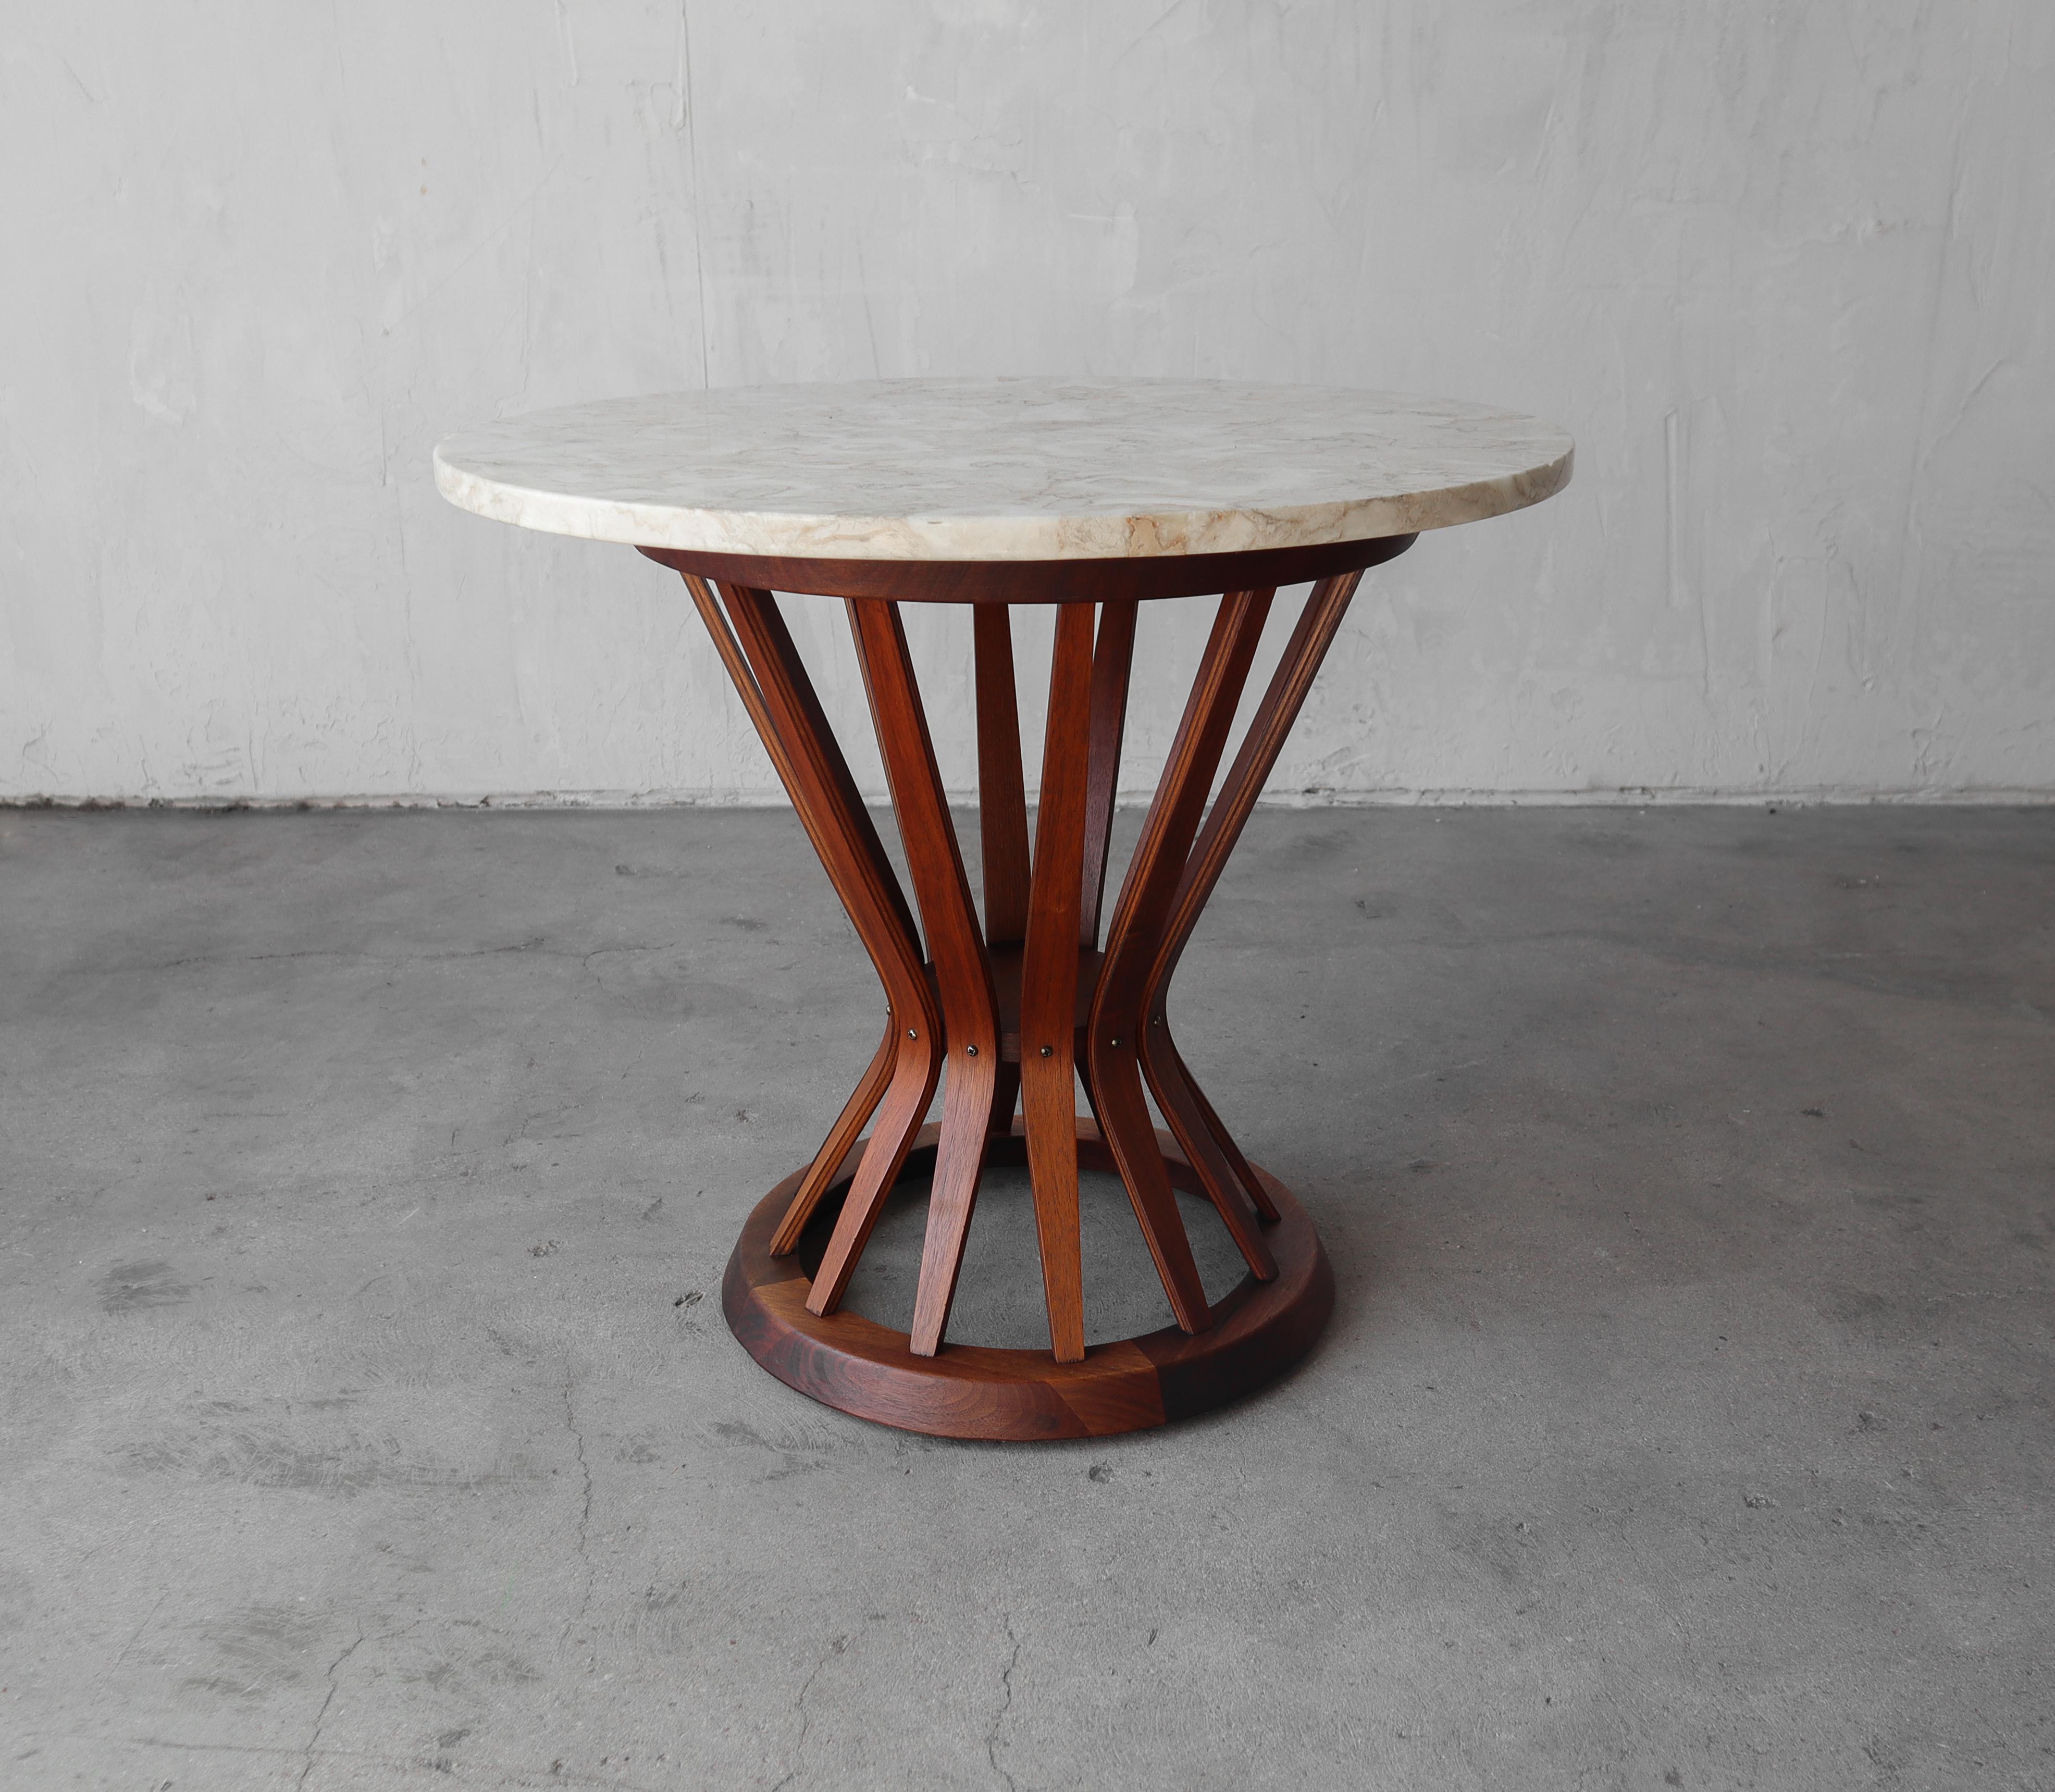 Gorgeous mid-century walnut and marble side table with brass details, designed in the 1950's by Edward Wormley for Dunbar. 

Table is in pristine condition with no imperfections to be noted. Installation ready.

Glass top can be included or